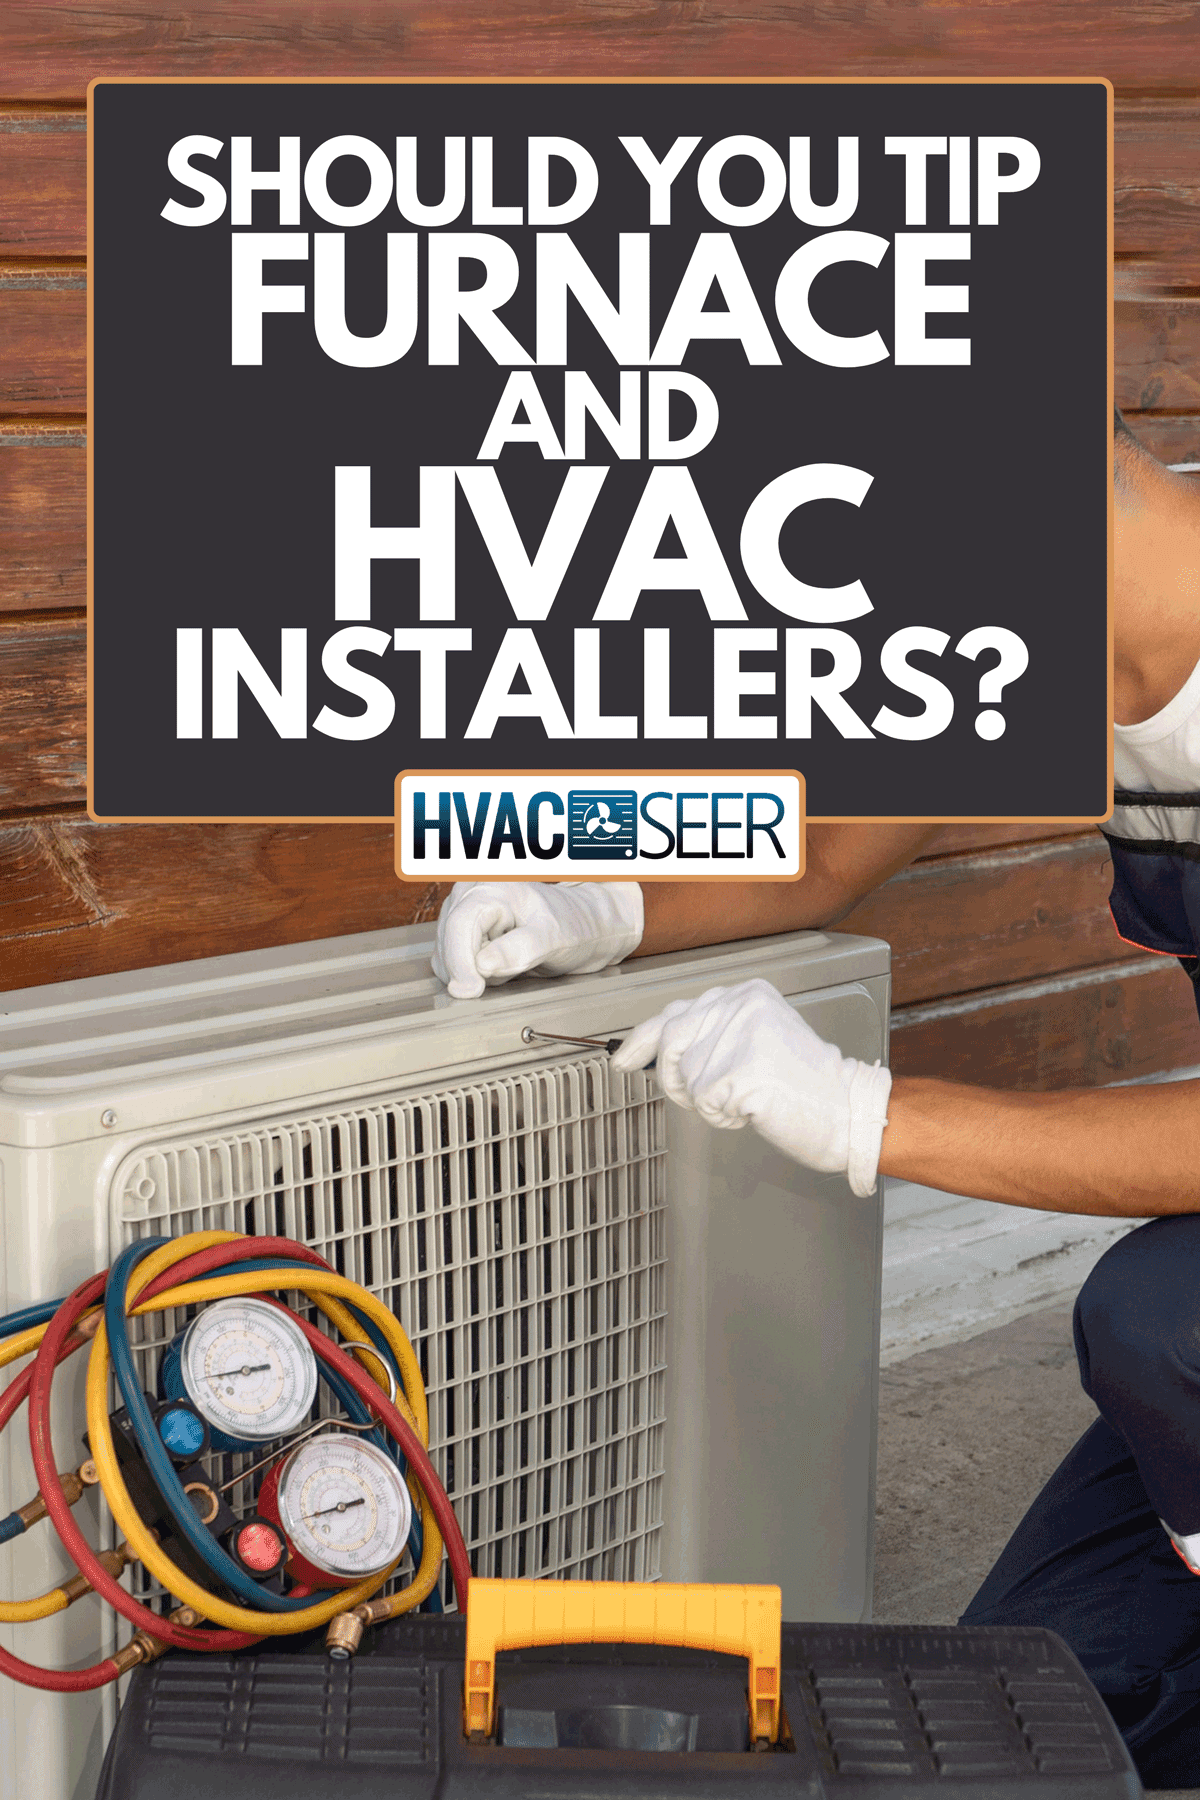 Technician in a disposable protective medical mask and gloves repairing an air conditioner, Should You Tip Furnace And HVAC Installers?